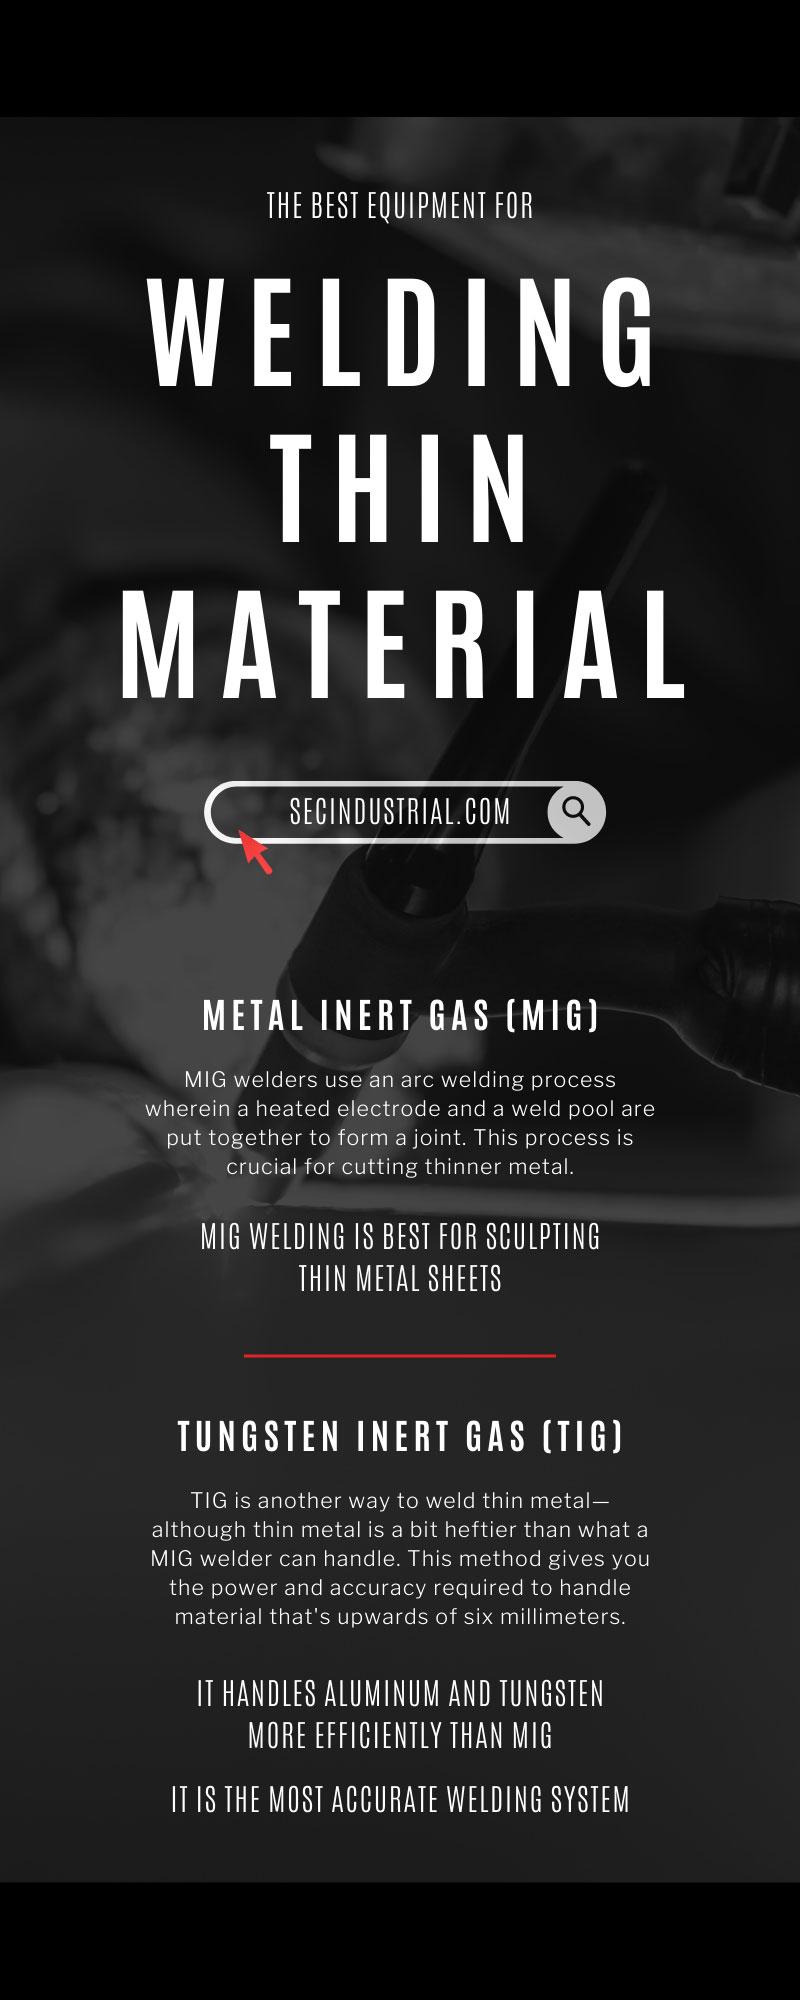 The Best Equipment for Welding Thin Material